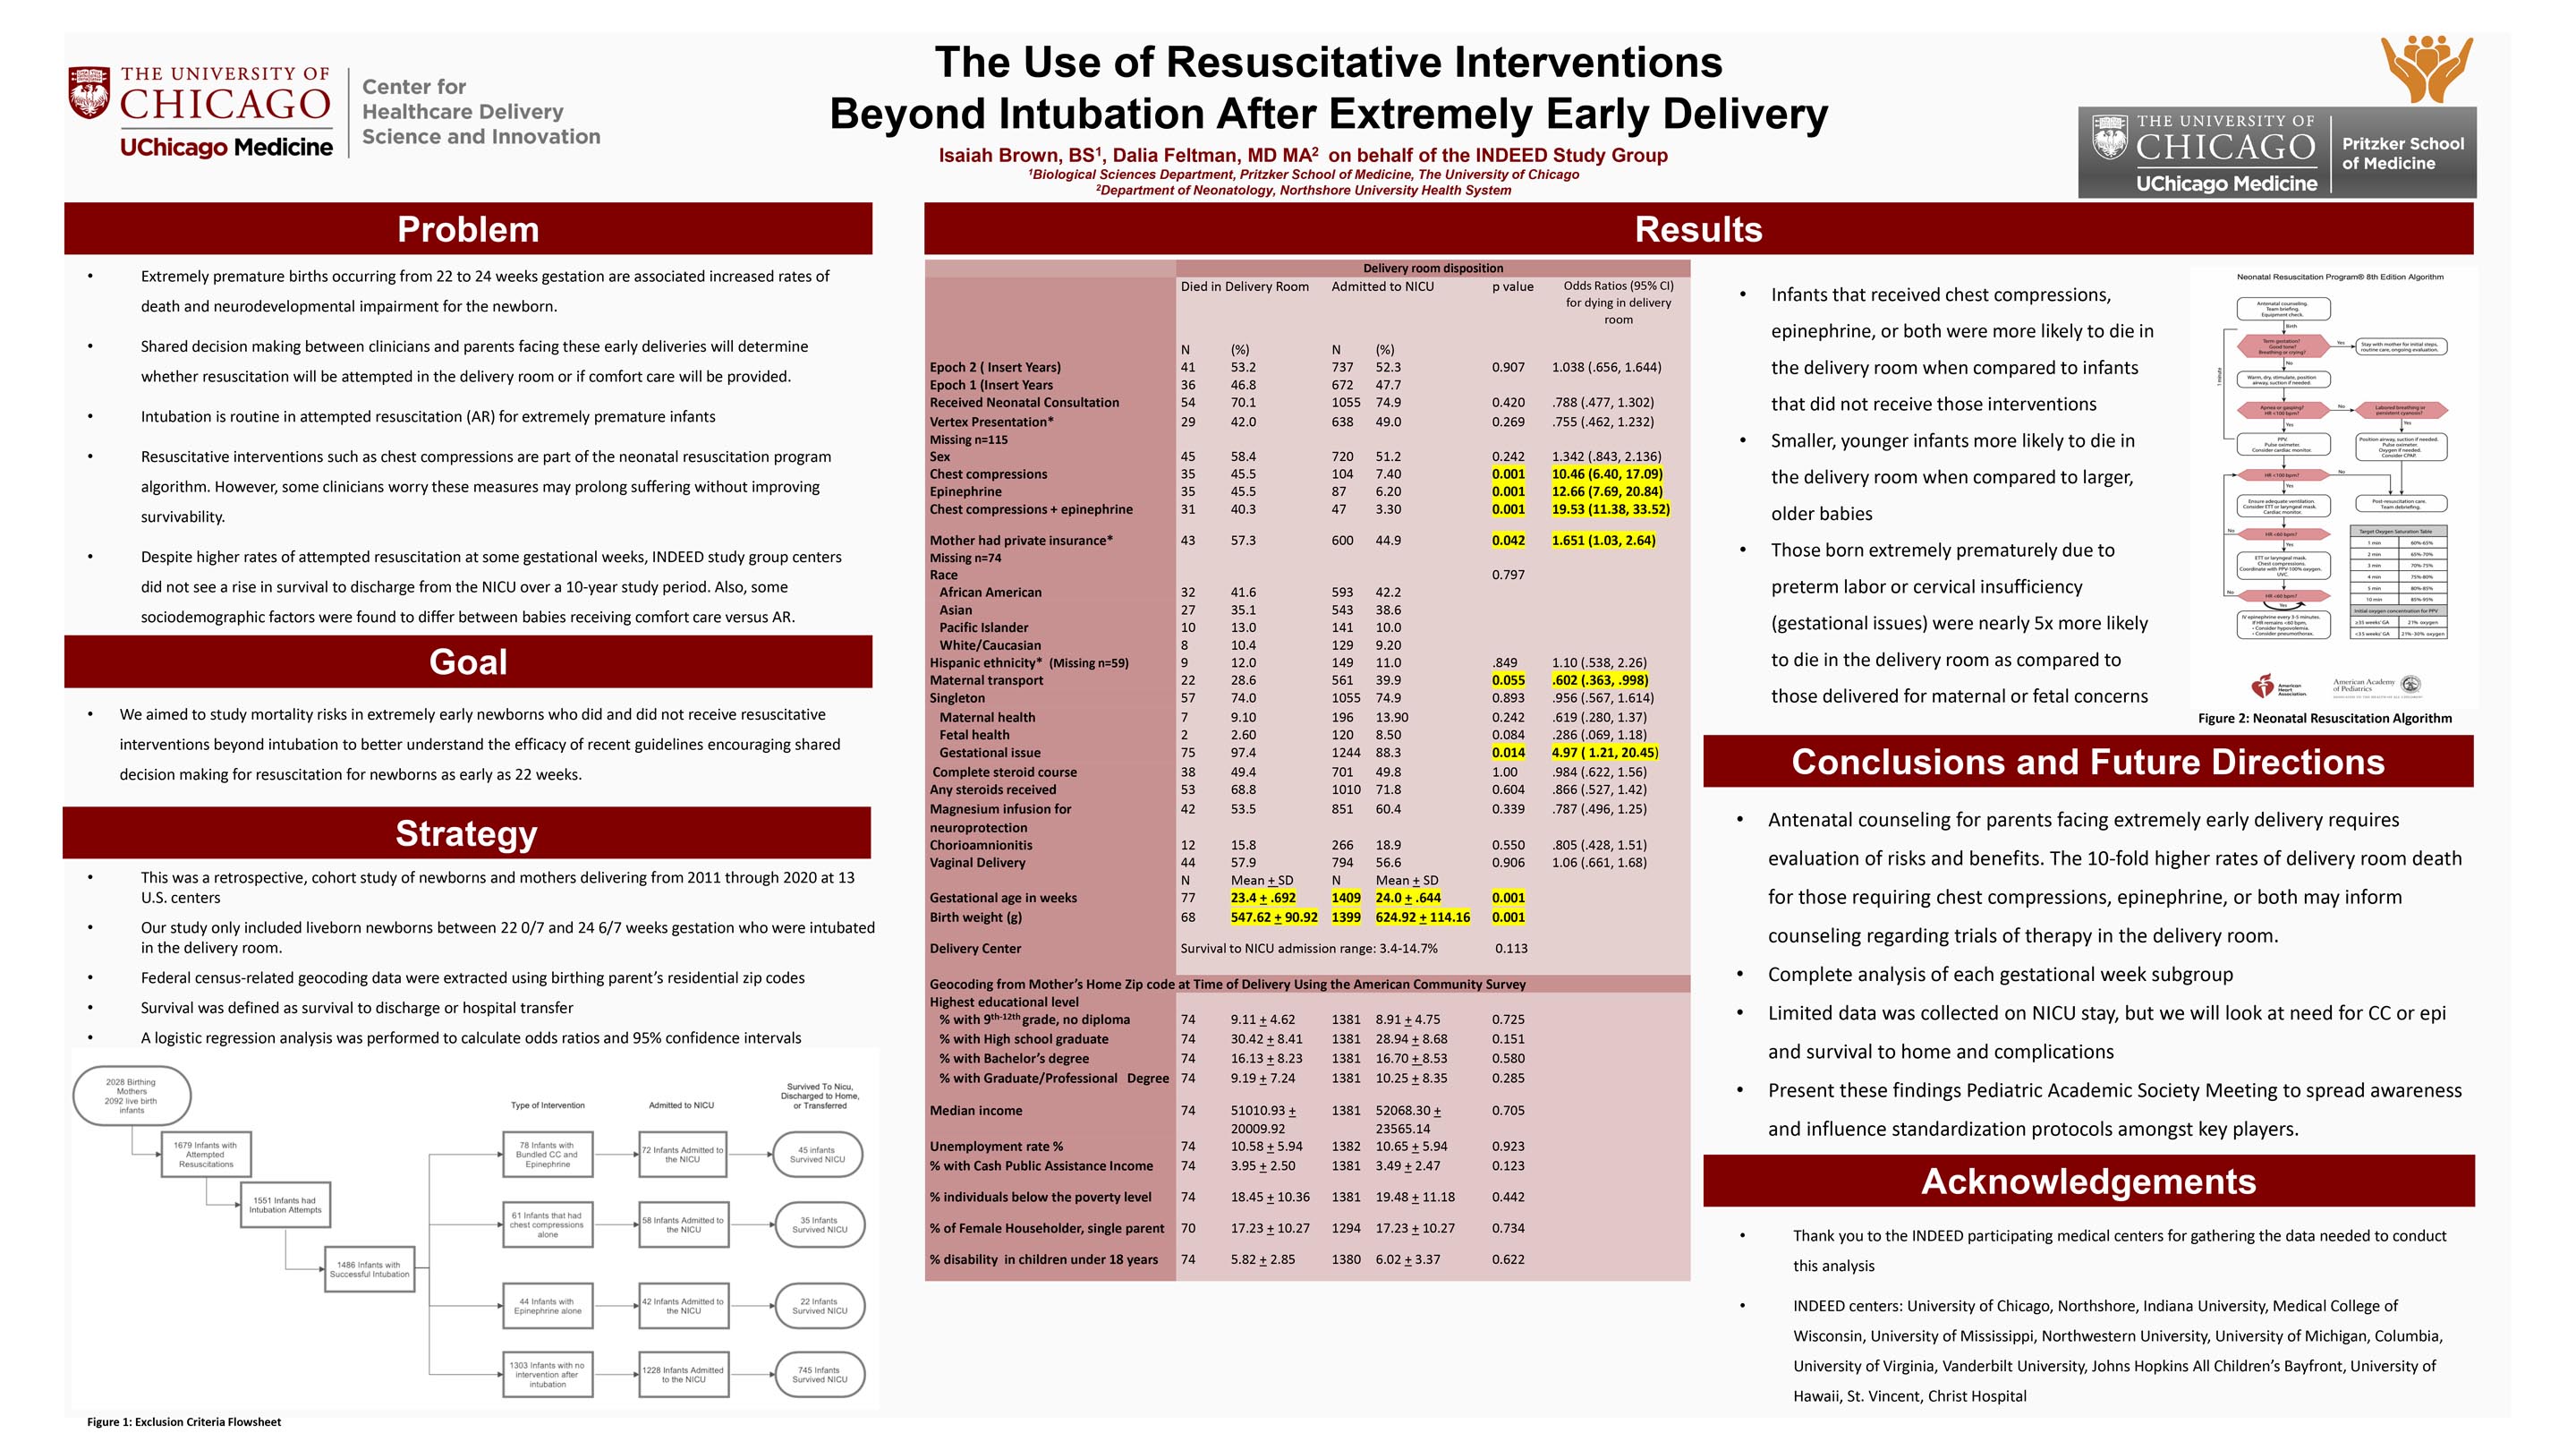 BROWN_The-Use-of-Resuscitative-Interventions-Beyond-Intubation-After-Extremely-Early-Delivery